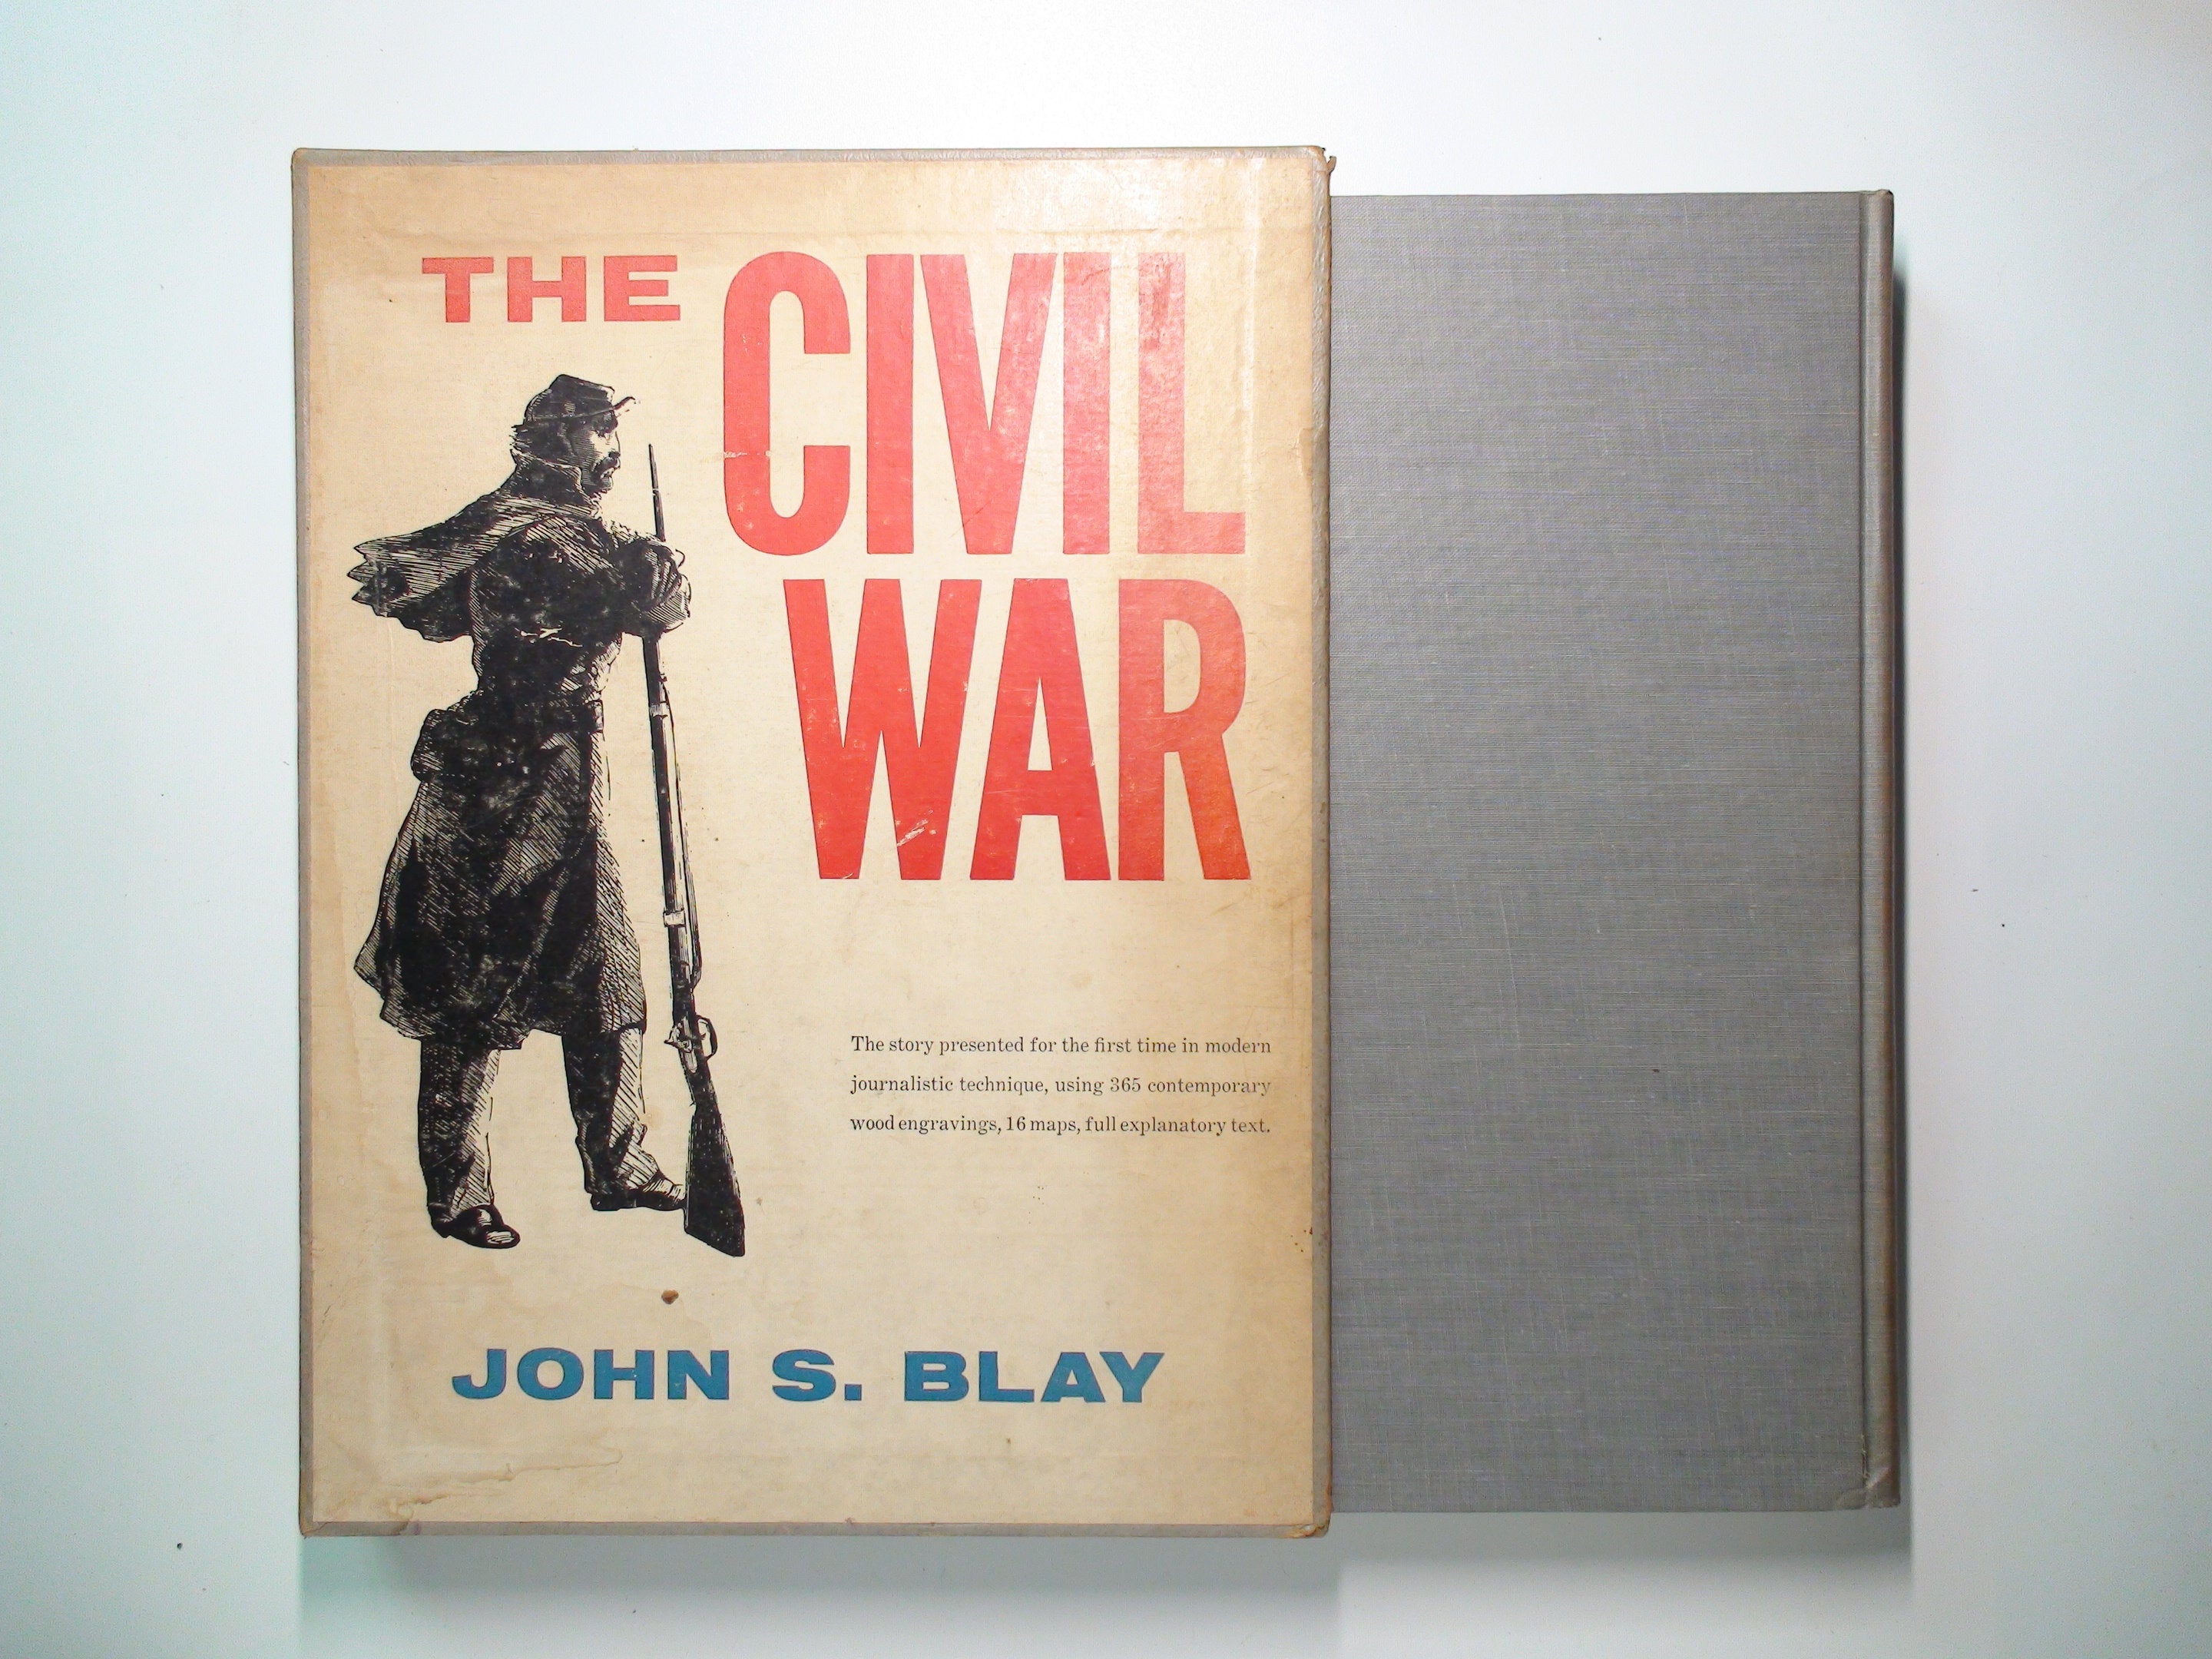 The Civil War A Pictorial Profile by John S. Blay, Illustrated, 1st Ed, 1958